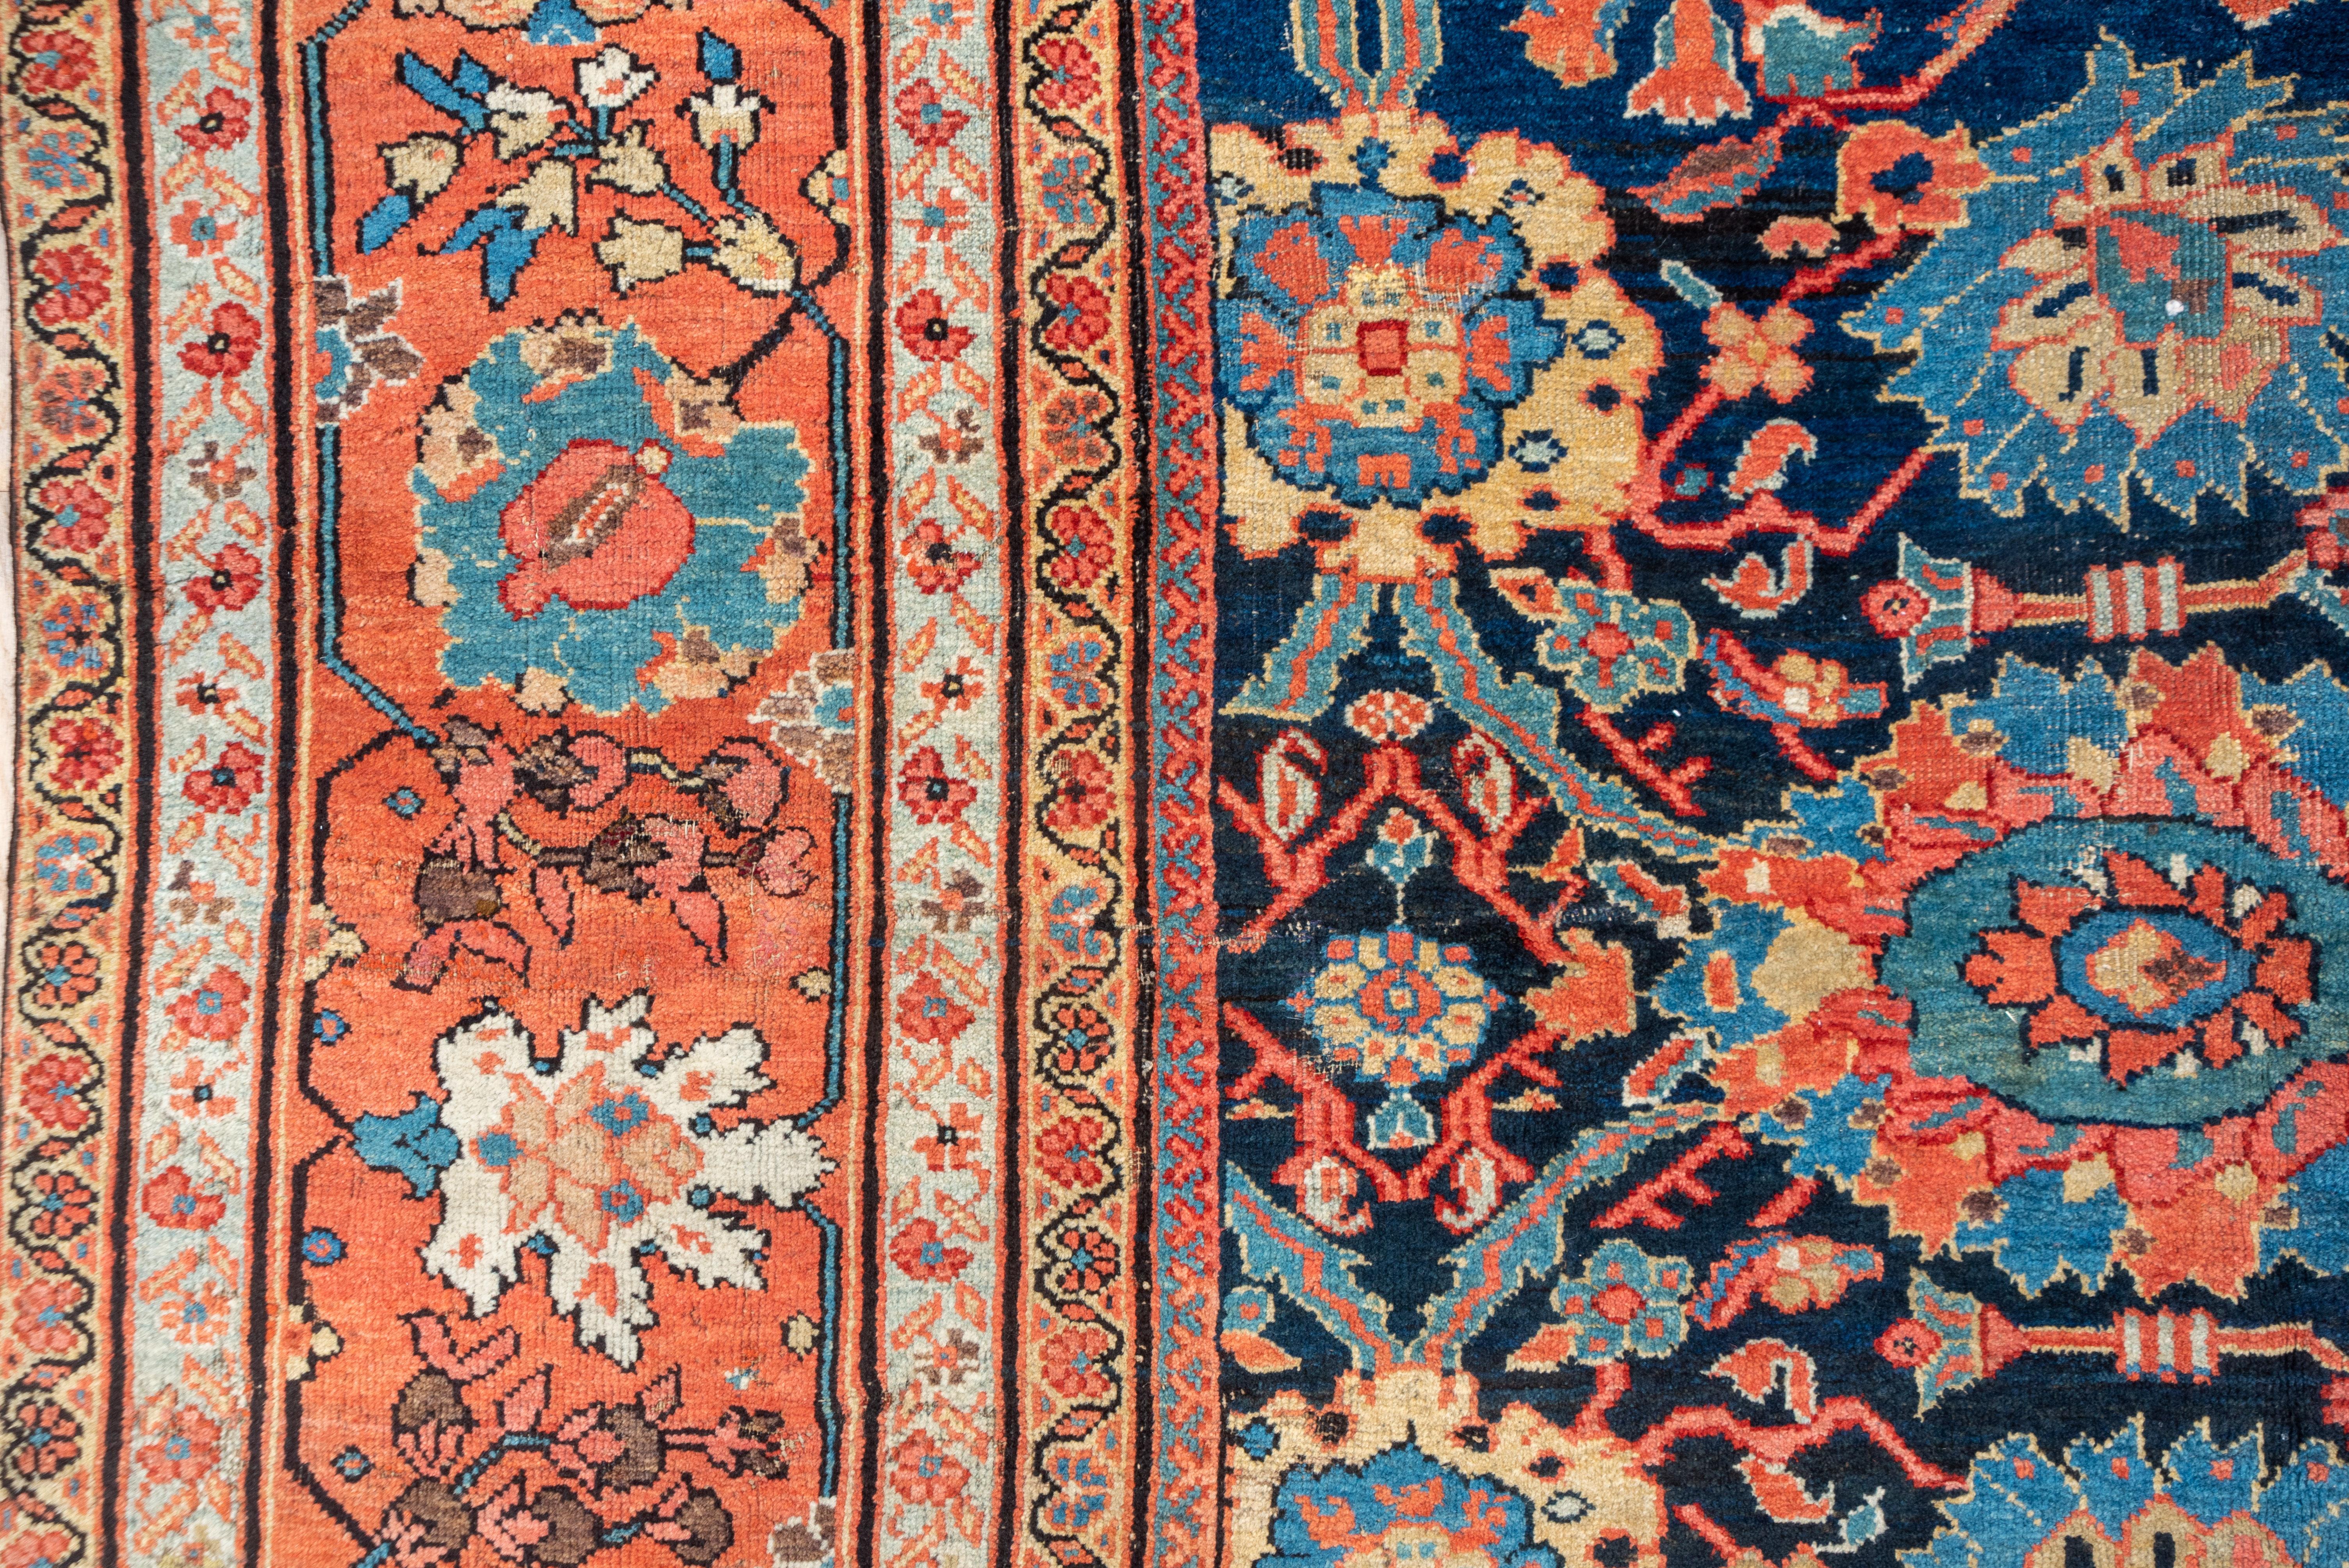 This magnificent west Persian village carpet shows a deep indigo navy field supporting an all-over pattern of ragged and smoothly oval palmettes, both lazy and erect, all detailed in lighter blues, straw, teal, green and light rose.